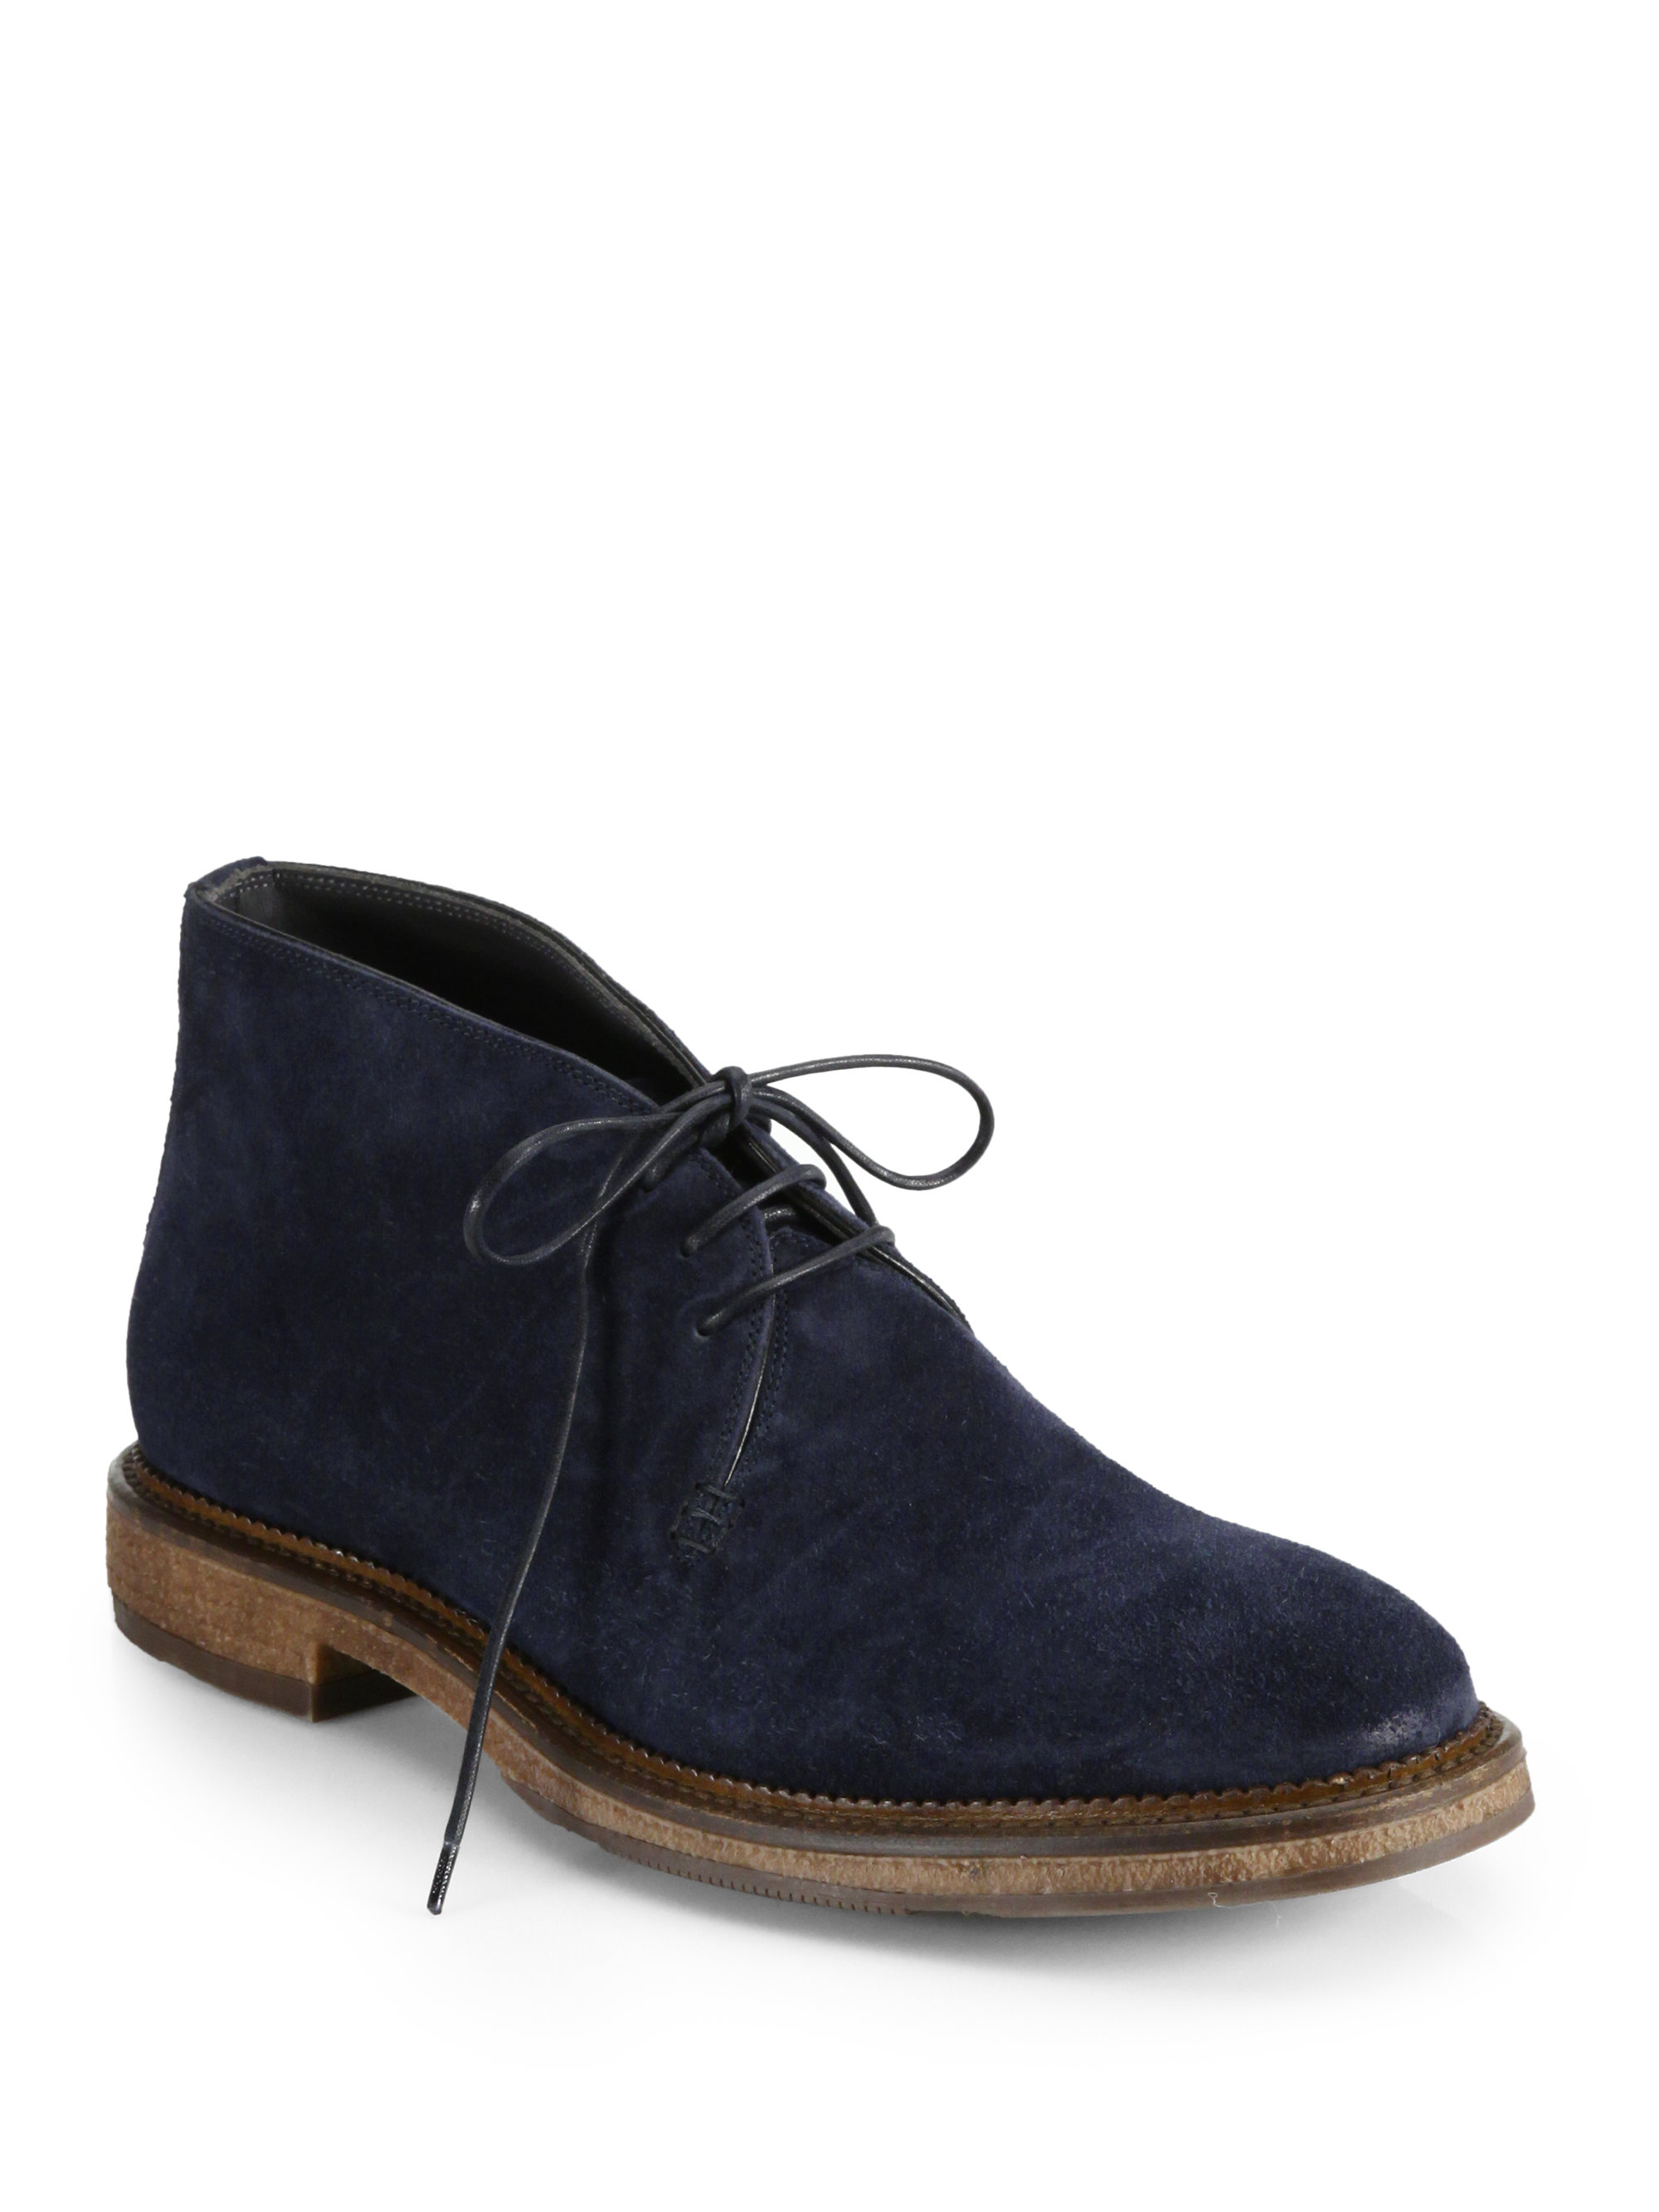 Lyst - To Boot Clarkston Crepe Sole Chukka Boot in Blue for Men